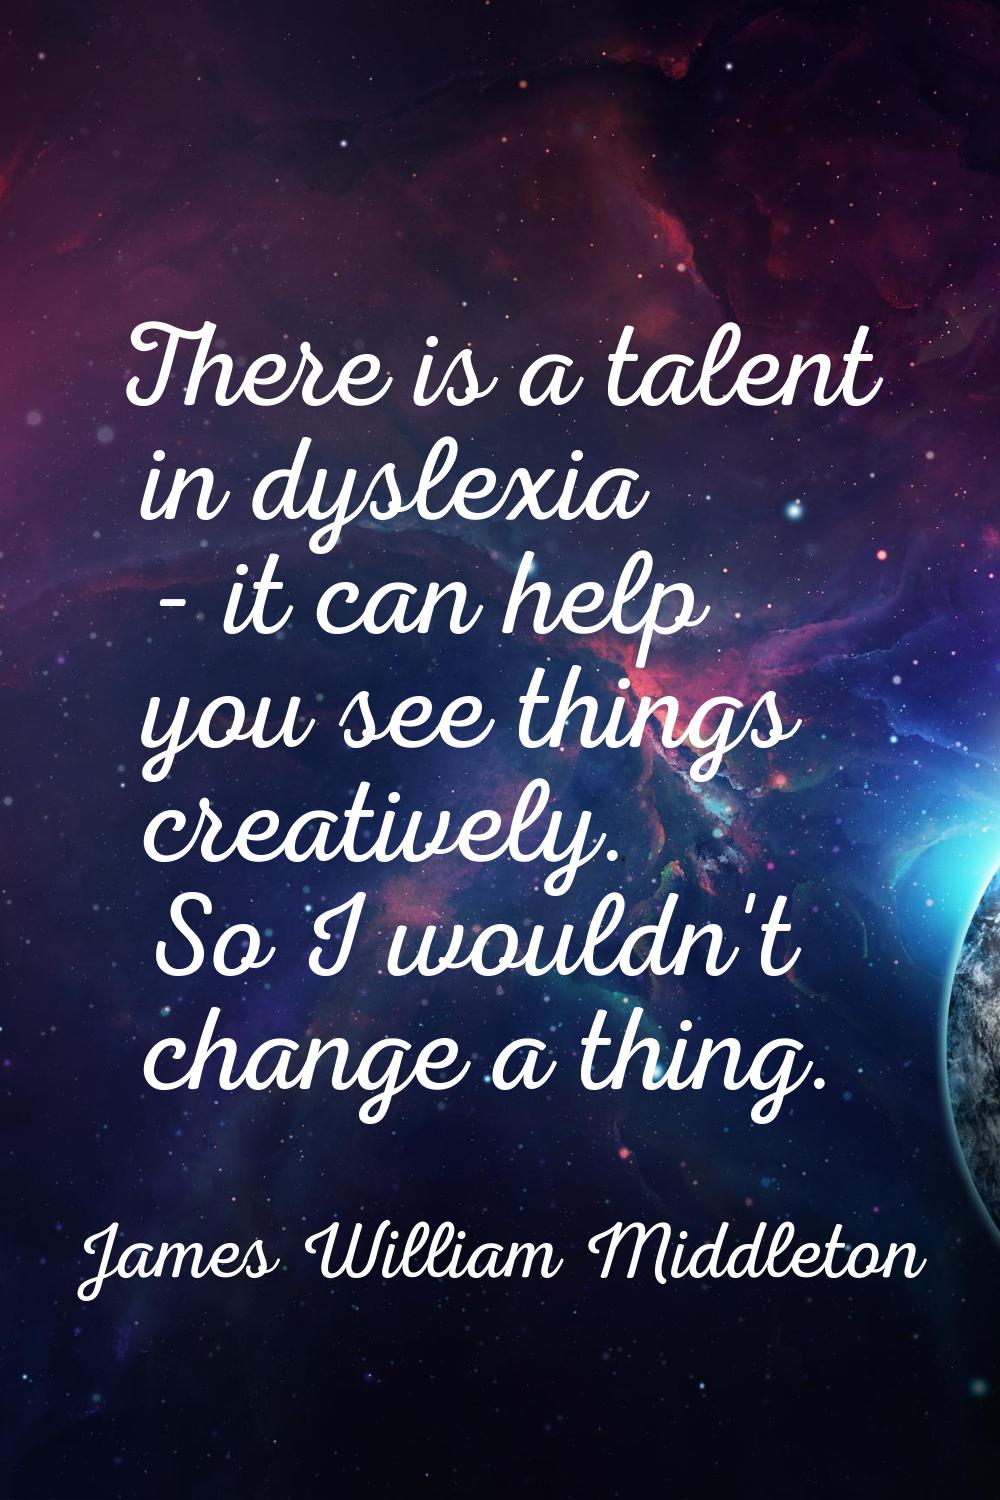 There is a talent in dyslexia - it can help you see things creatively. So I wouldn't change a thing